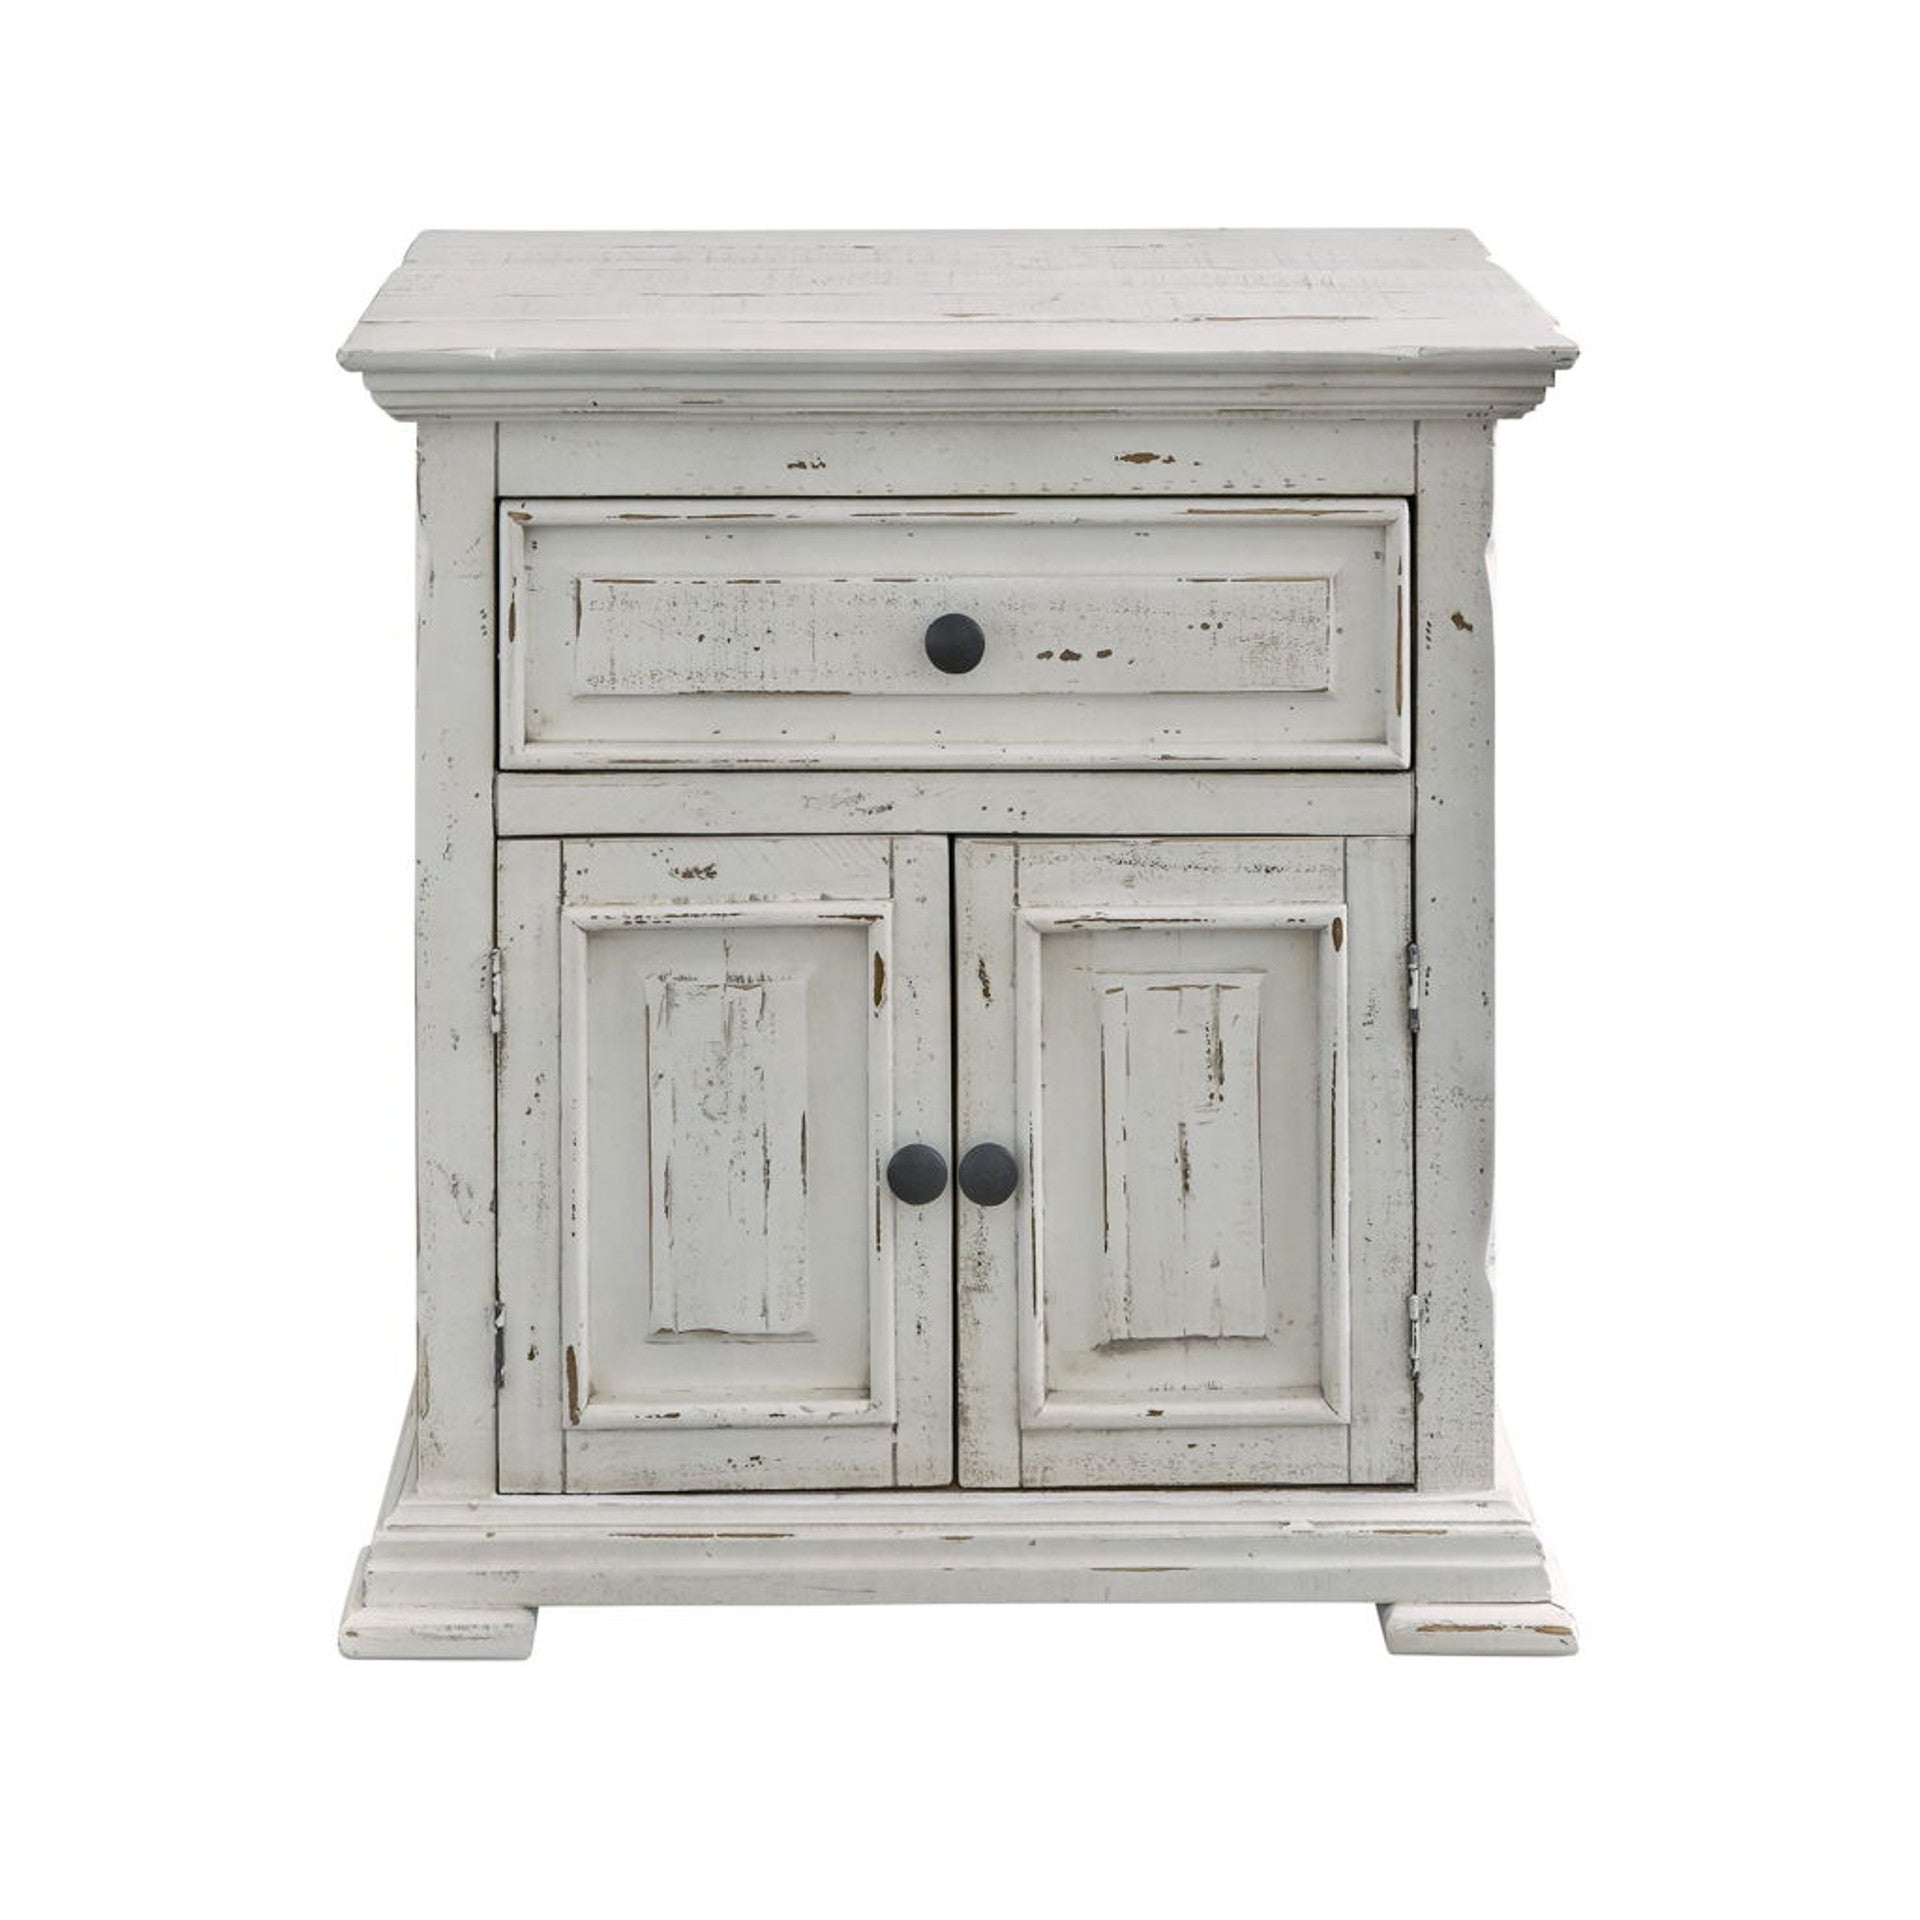 Olivia White Rustic Bedroom Set from Elements Furniture - Solid Wood